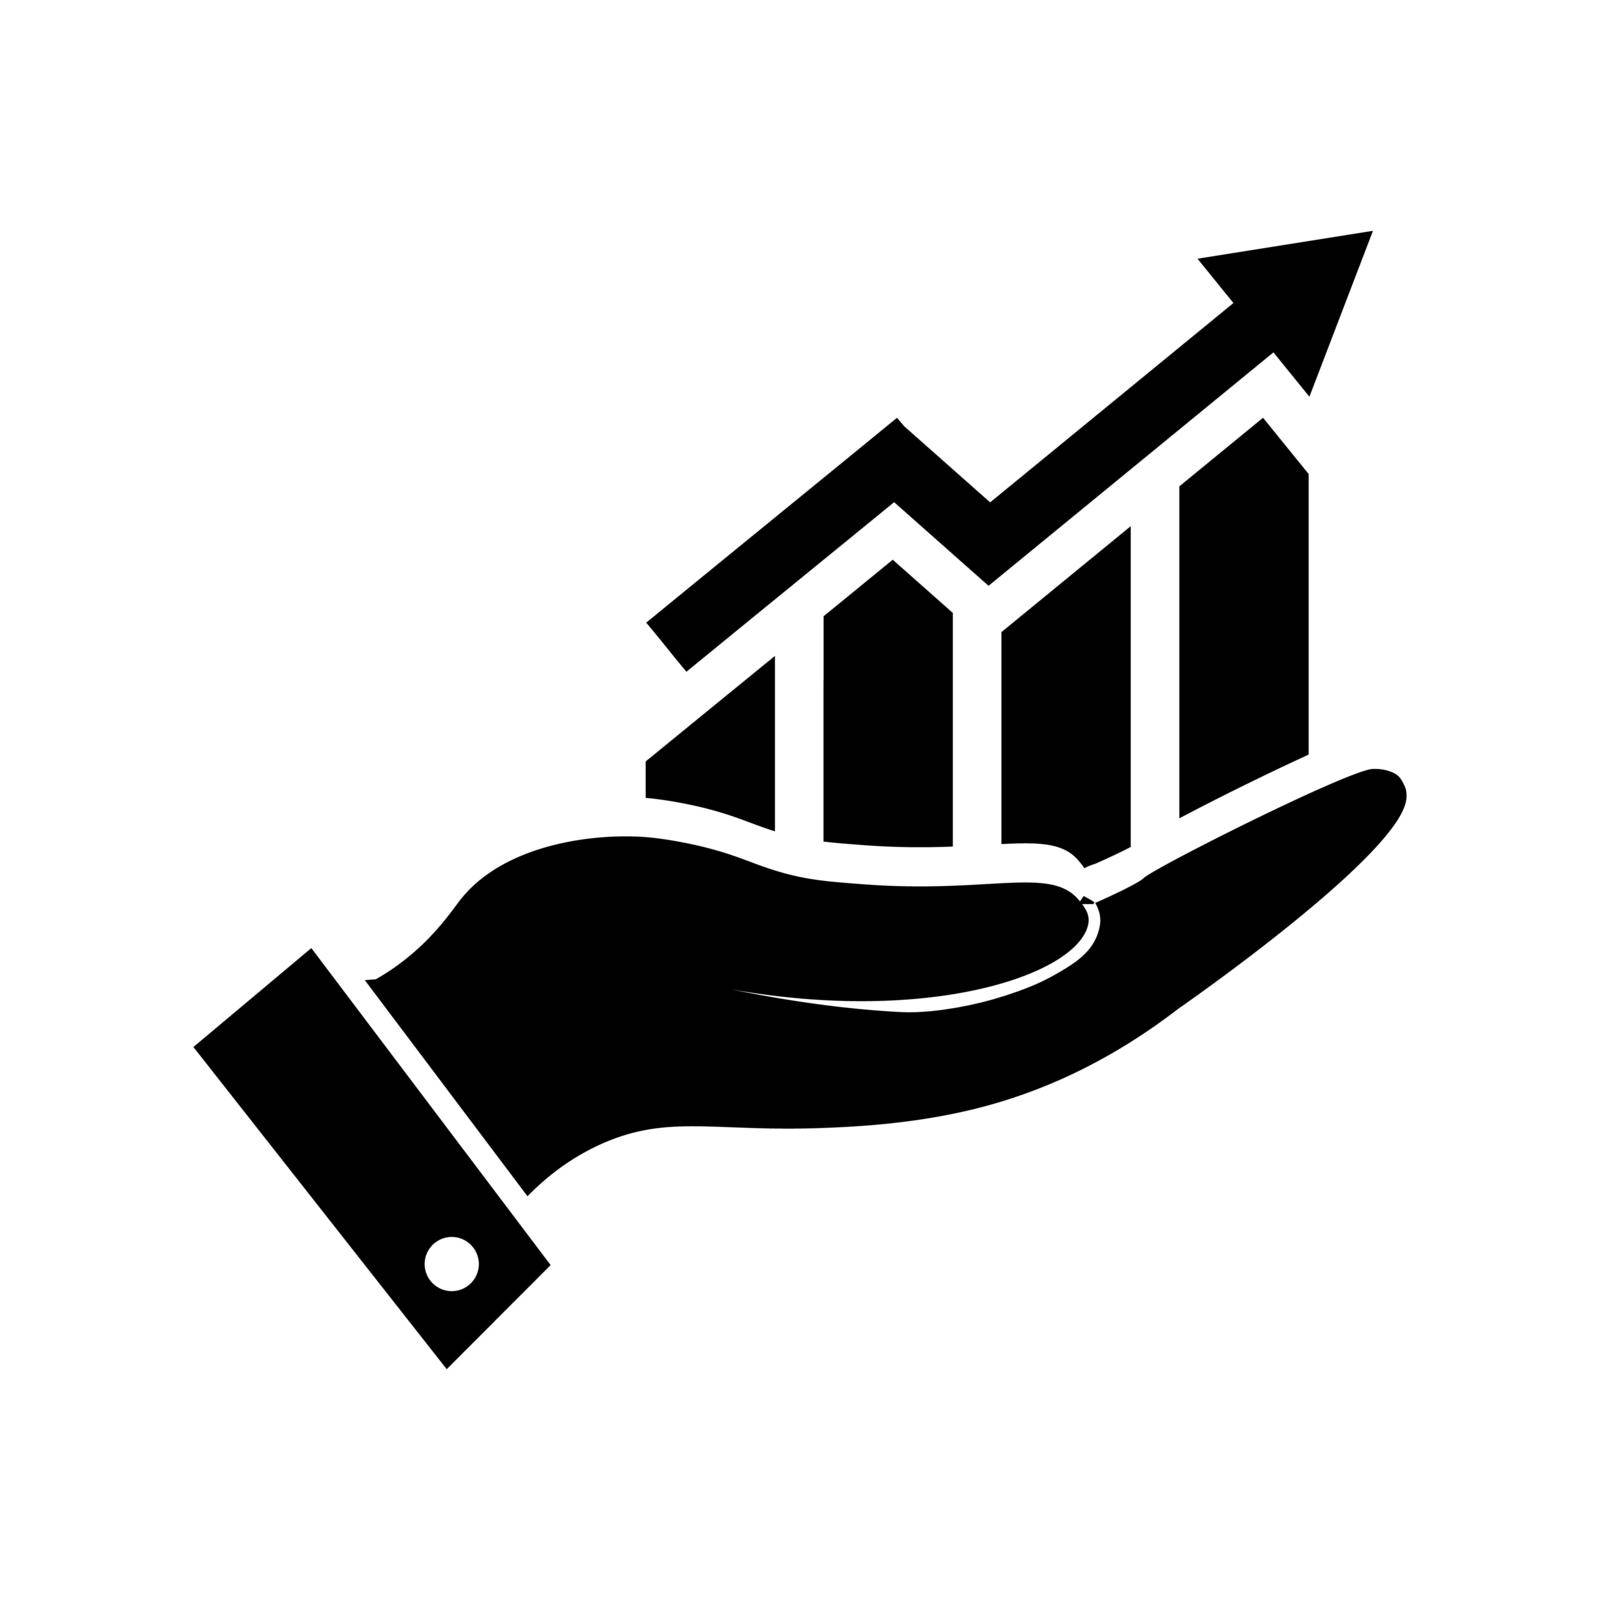 Market forecast icon in flat style. Growth symbol on white background. Diagram with an arrow on the hand in black. Vector illustration for web site design, logo, app, UI